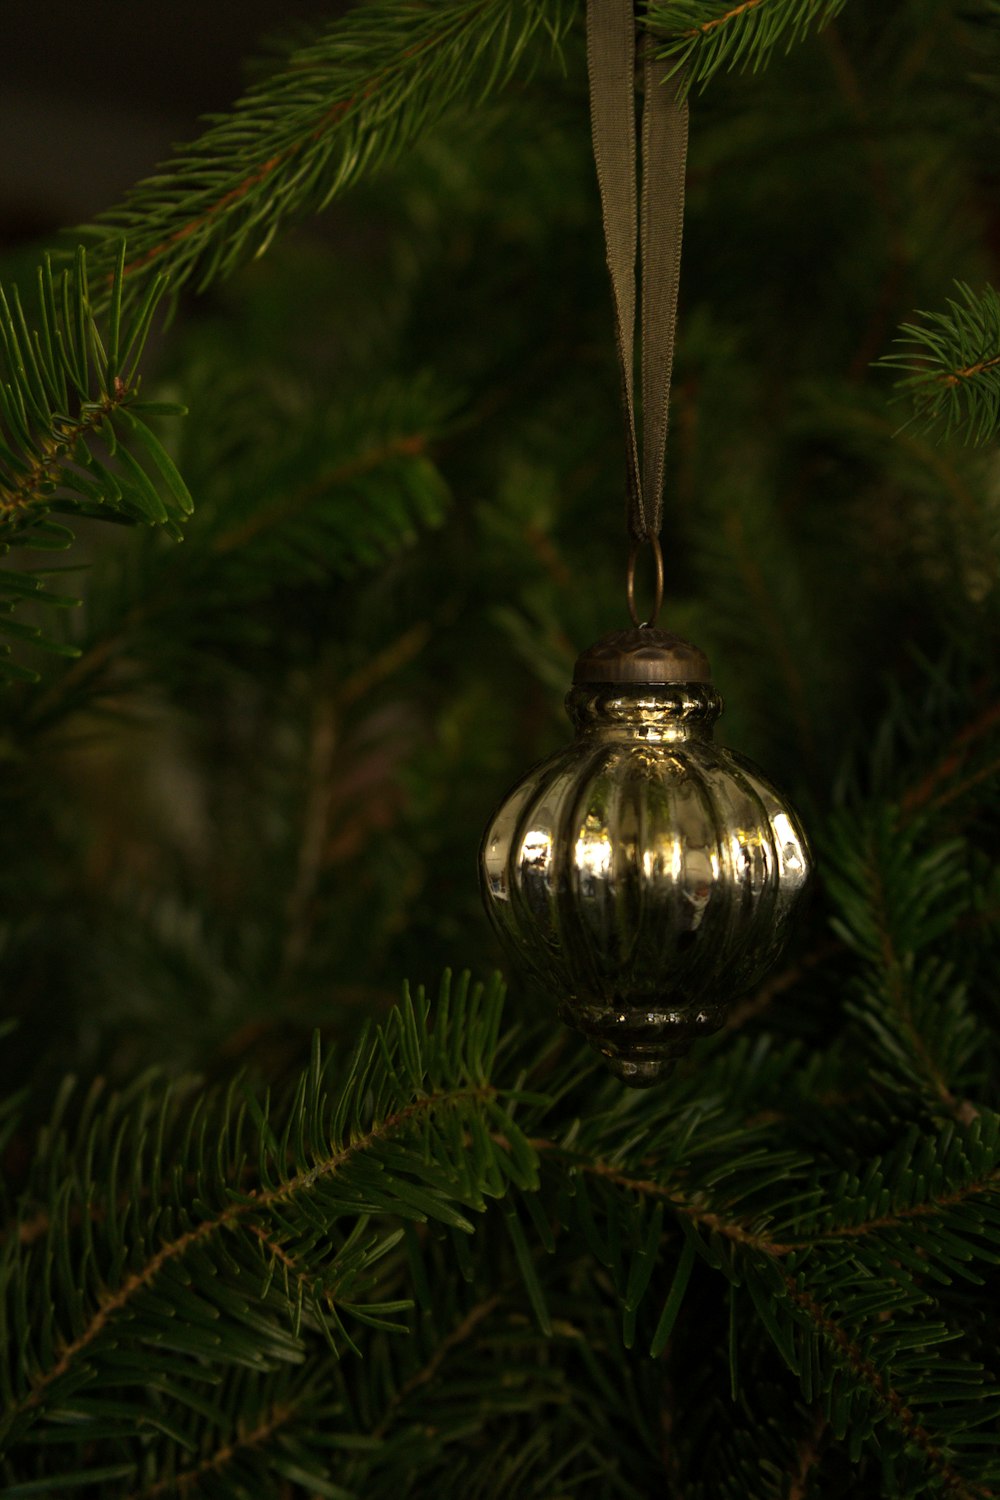 a silver ornament hanging from a christmas tree